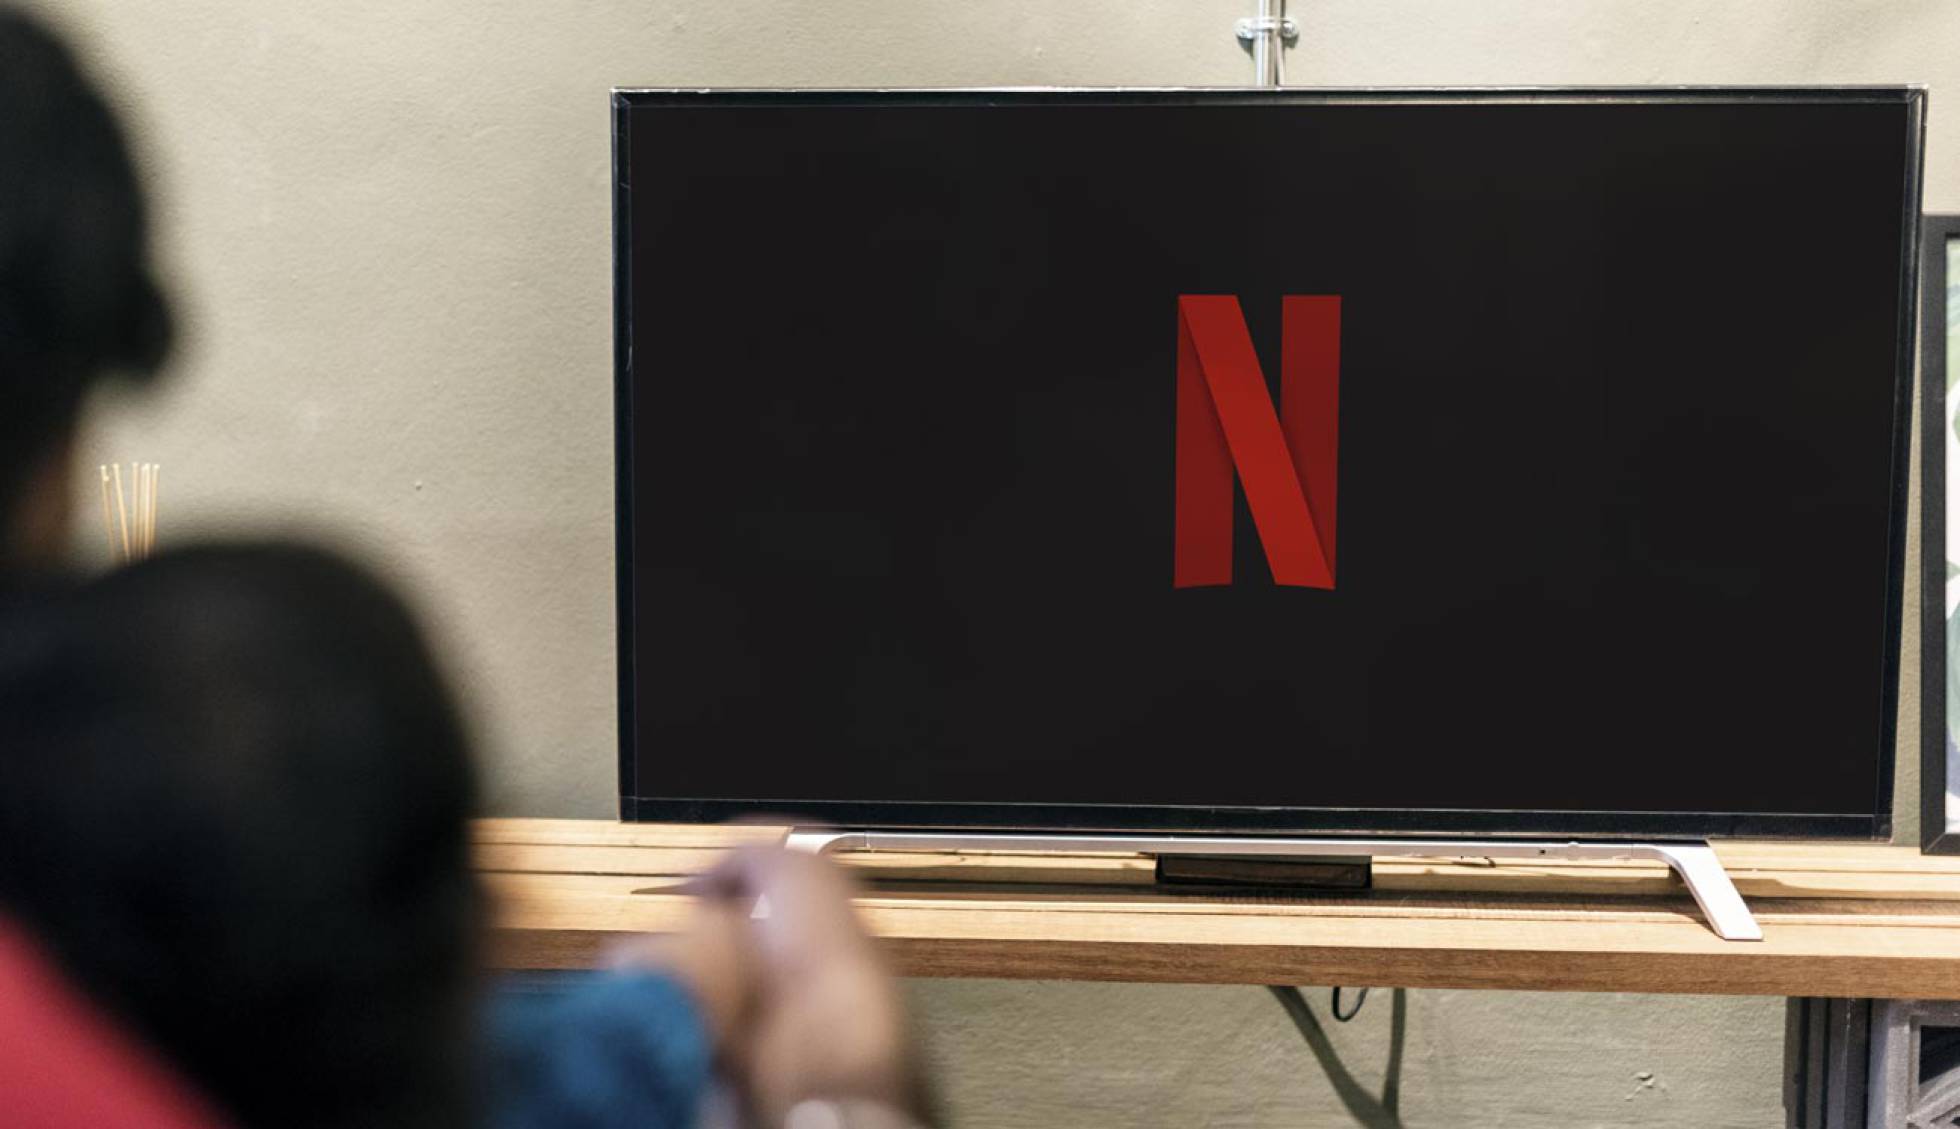 NETFLIX IMPROVES, AND MUCH, THE USE OF SUBTITLES USED ON SMART TVS